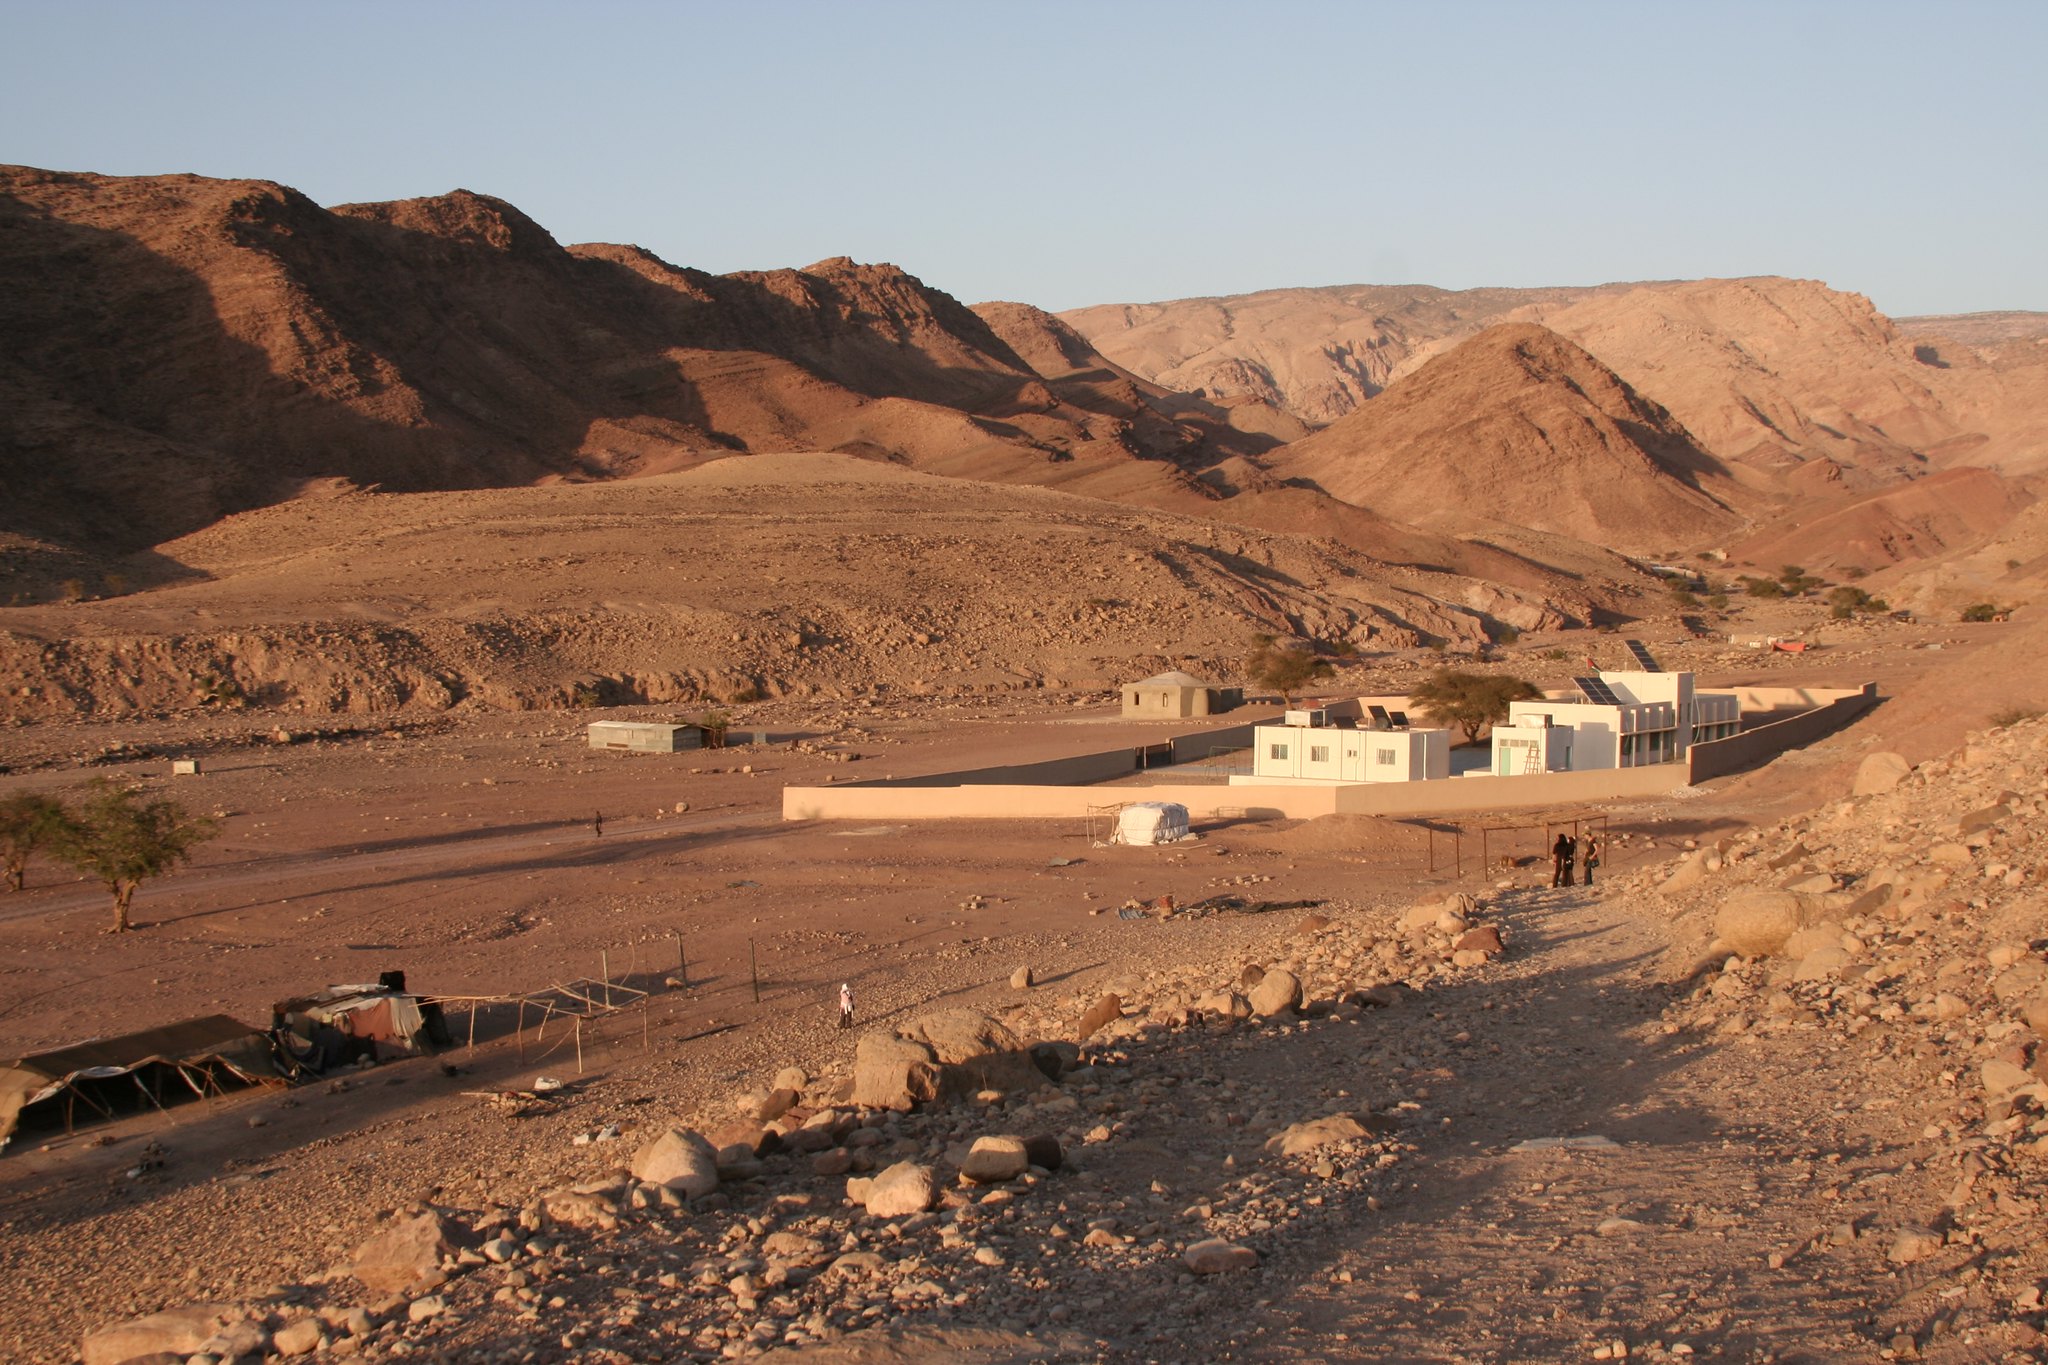 <p>Feynan donates a large portion of their revenue <strong>to fund conservation efforts in Dana,</strong> a 320km2 region with the highest level of biodiversity in Jordan. </p>  <p>At the lodge, guests can go hiking or biking through the wildlife reserve, or spend time with a Bedouin shepherd to learn about the local culture and cuisine.</p>